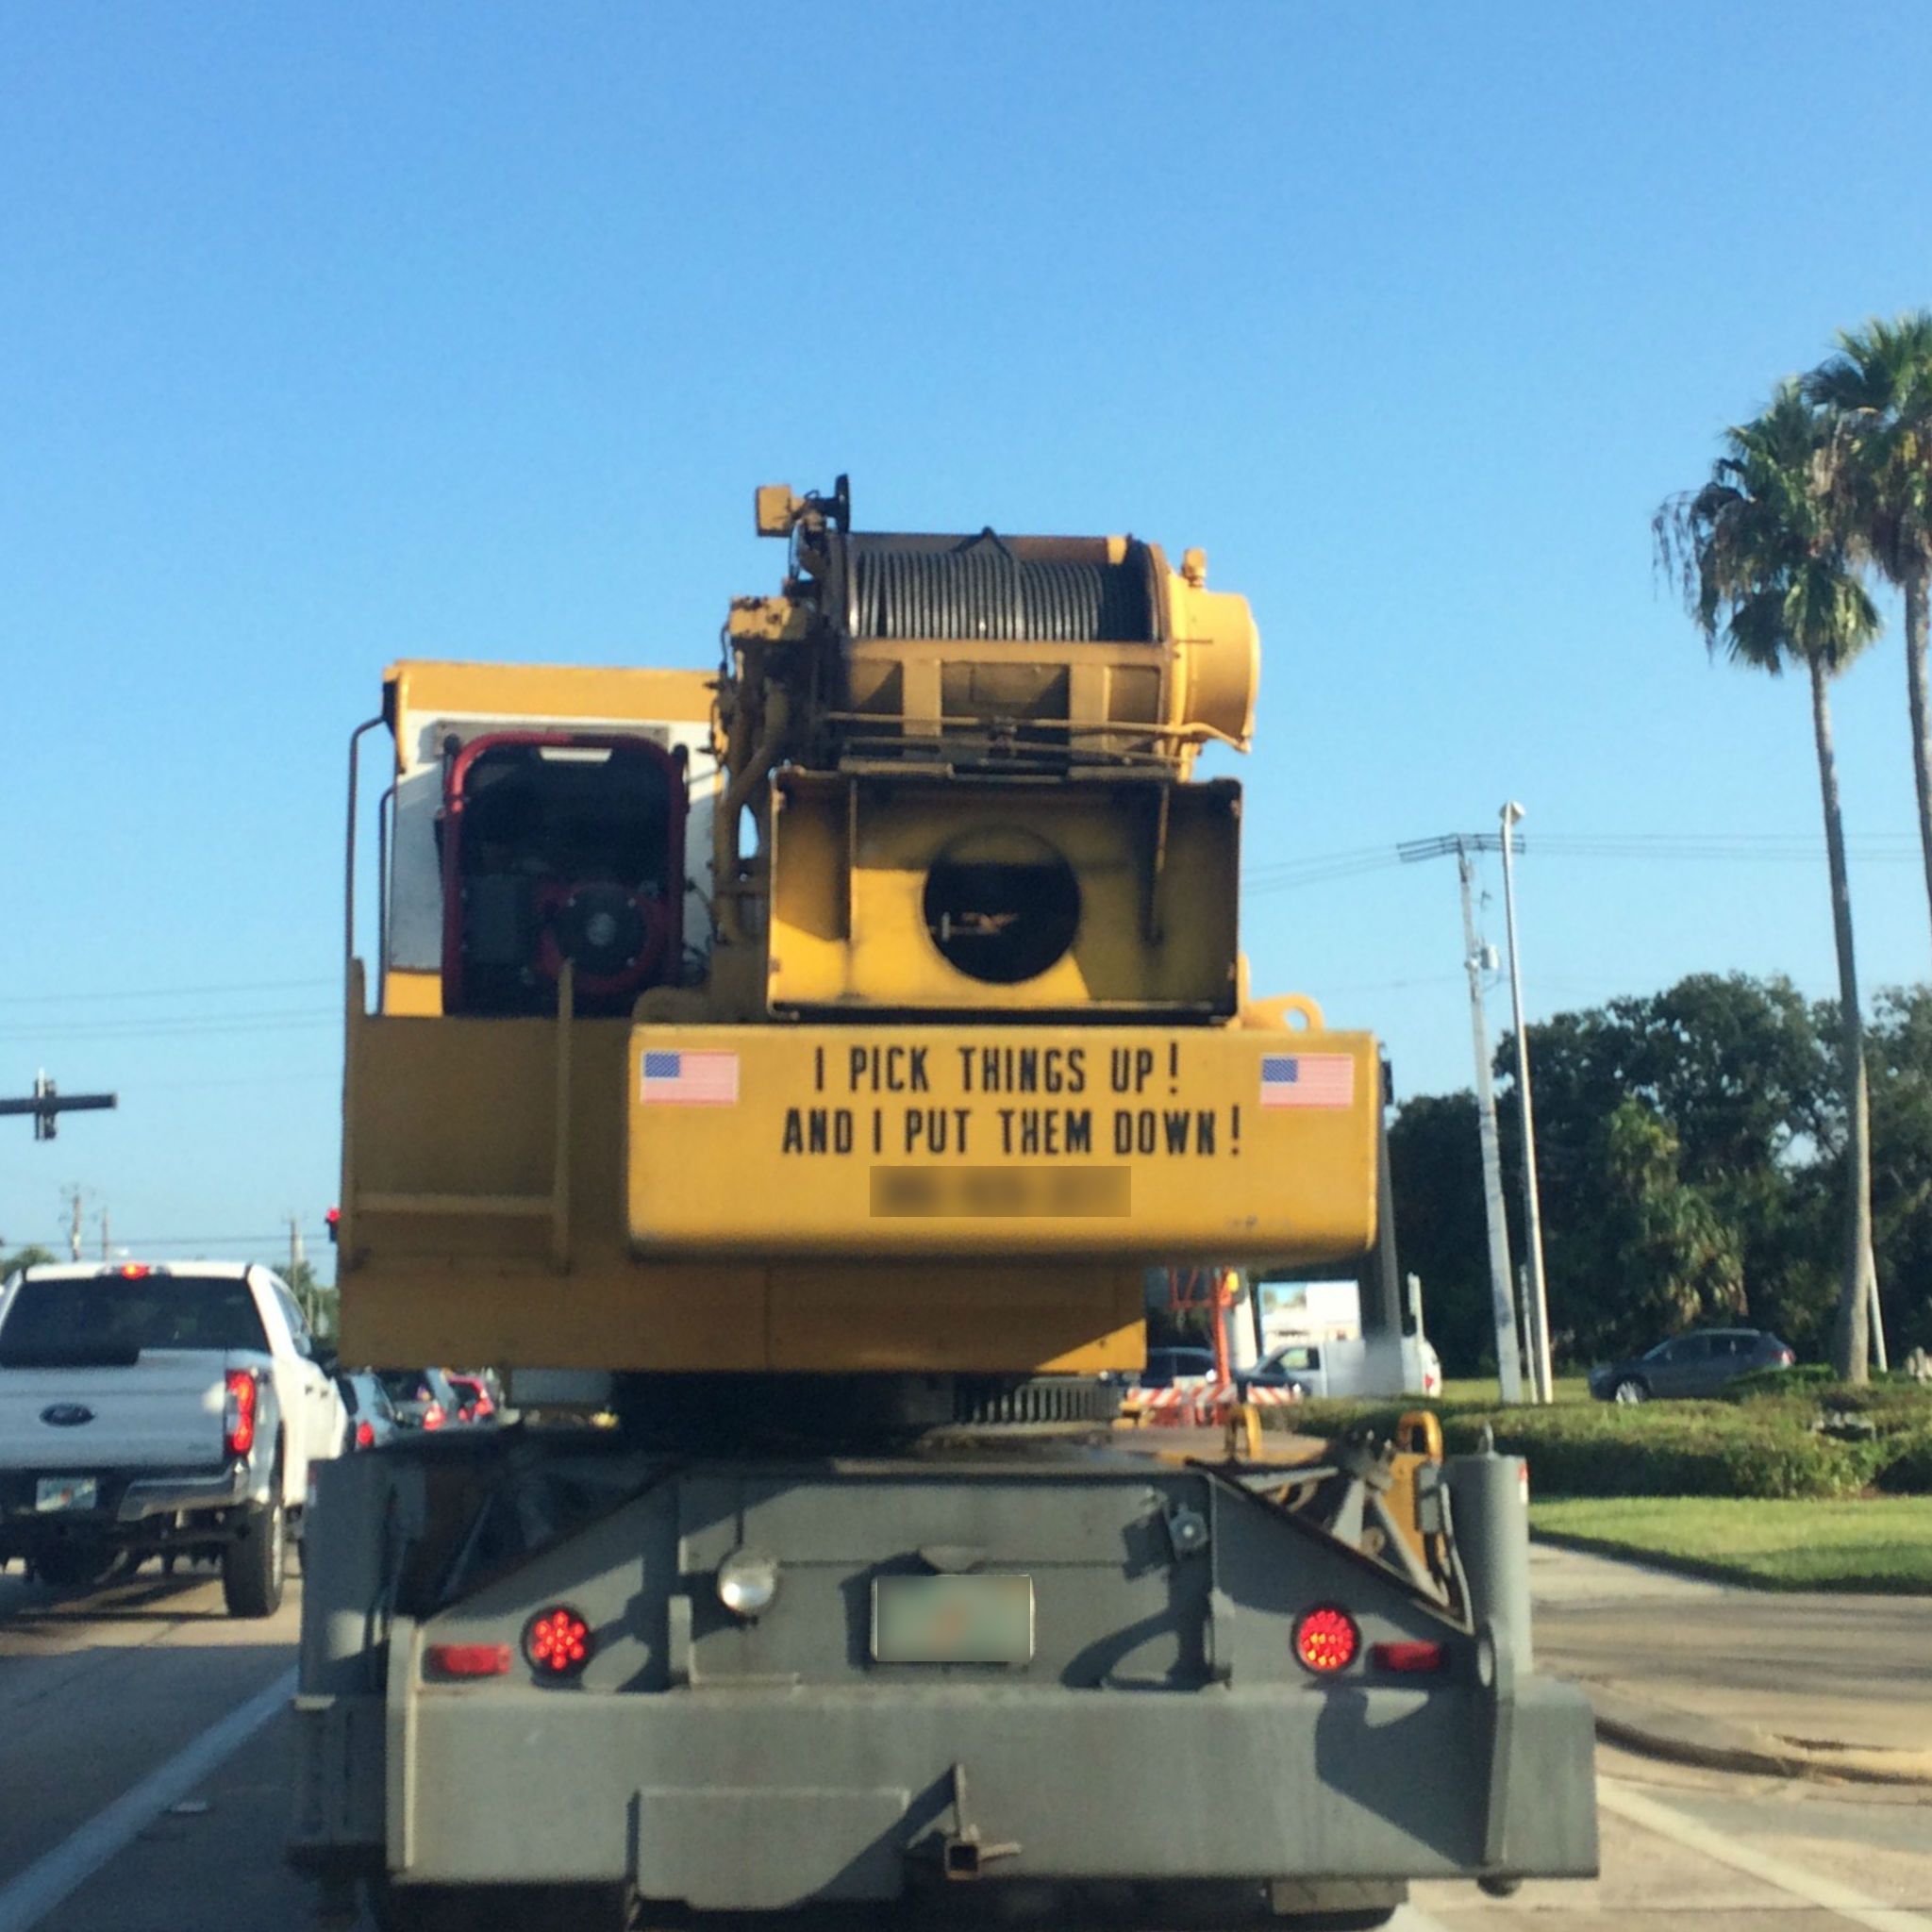 I wish more heavy machinery had signs like this on it. I'm always curious what they do... THE MORE YOU KNOW.